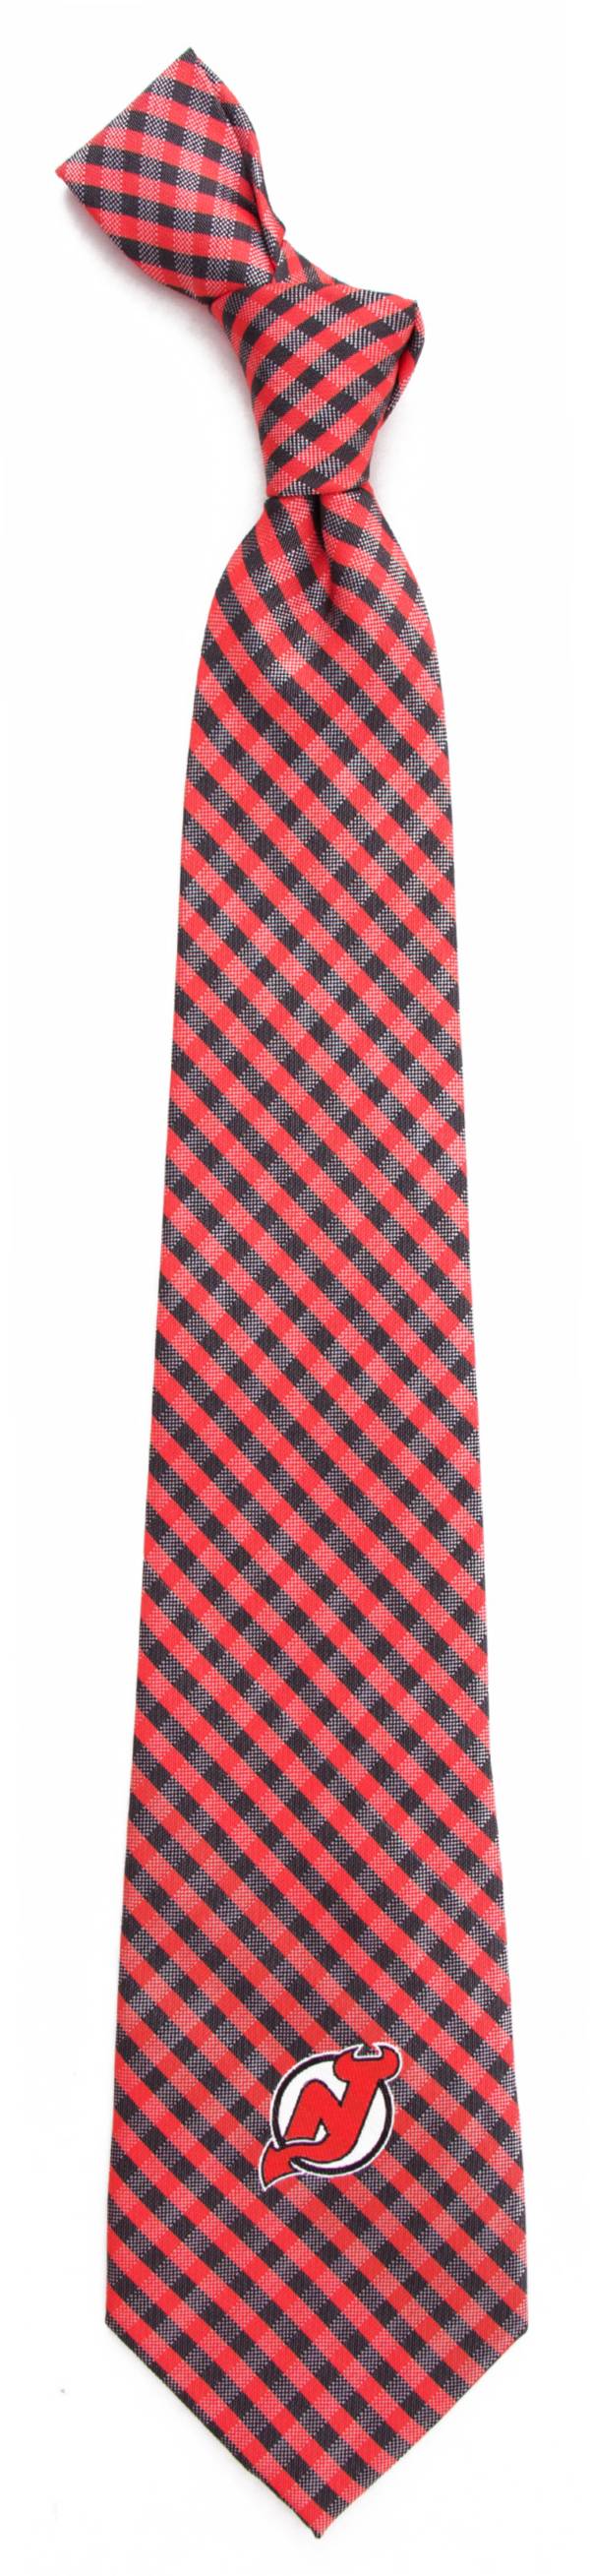 Eagles Wings New Jersey Devils Gingham Necktie product image